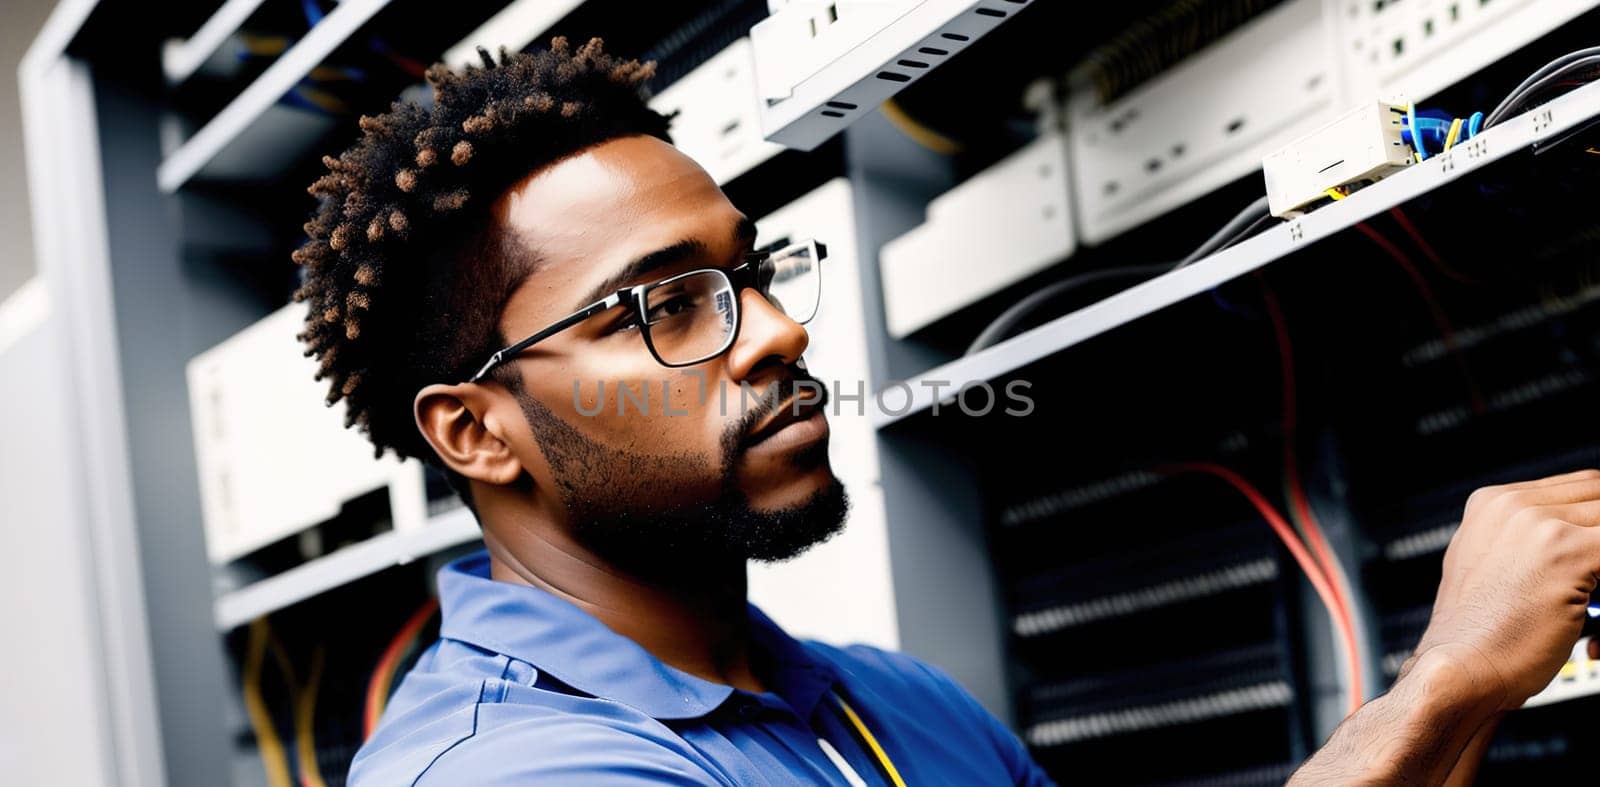 The image shows a man in a blue shirt and glasses working on a computer in a data center.